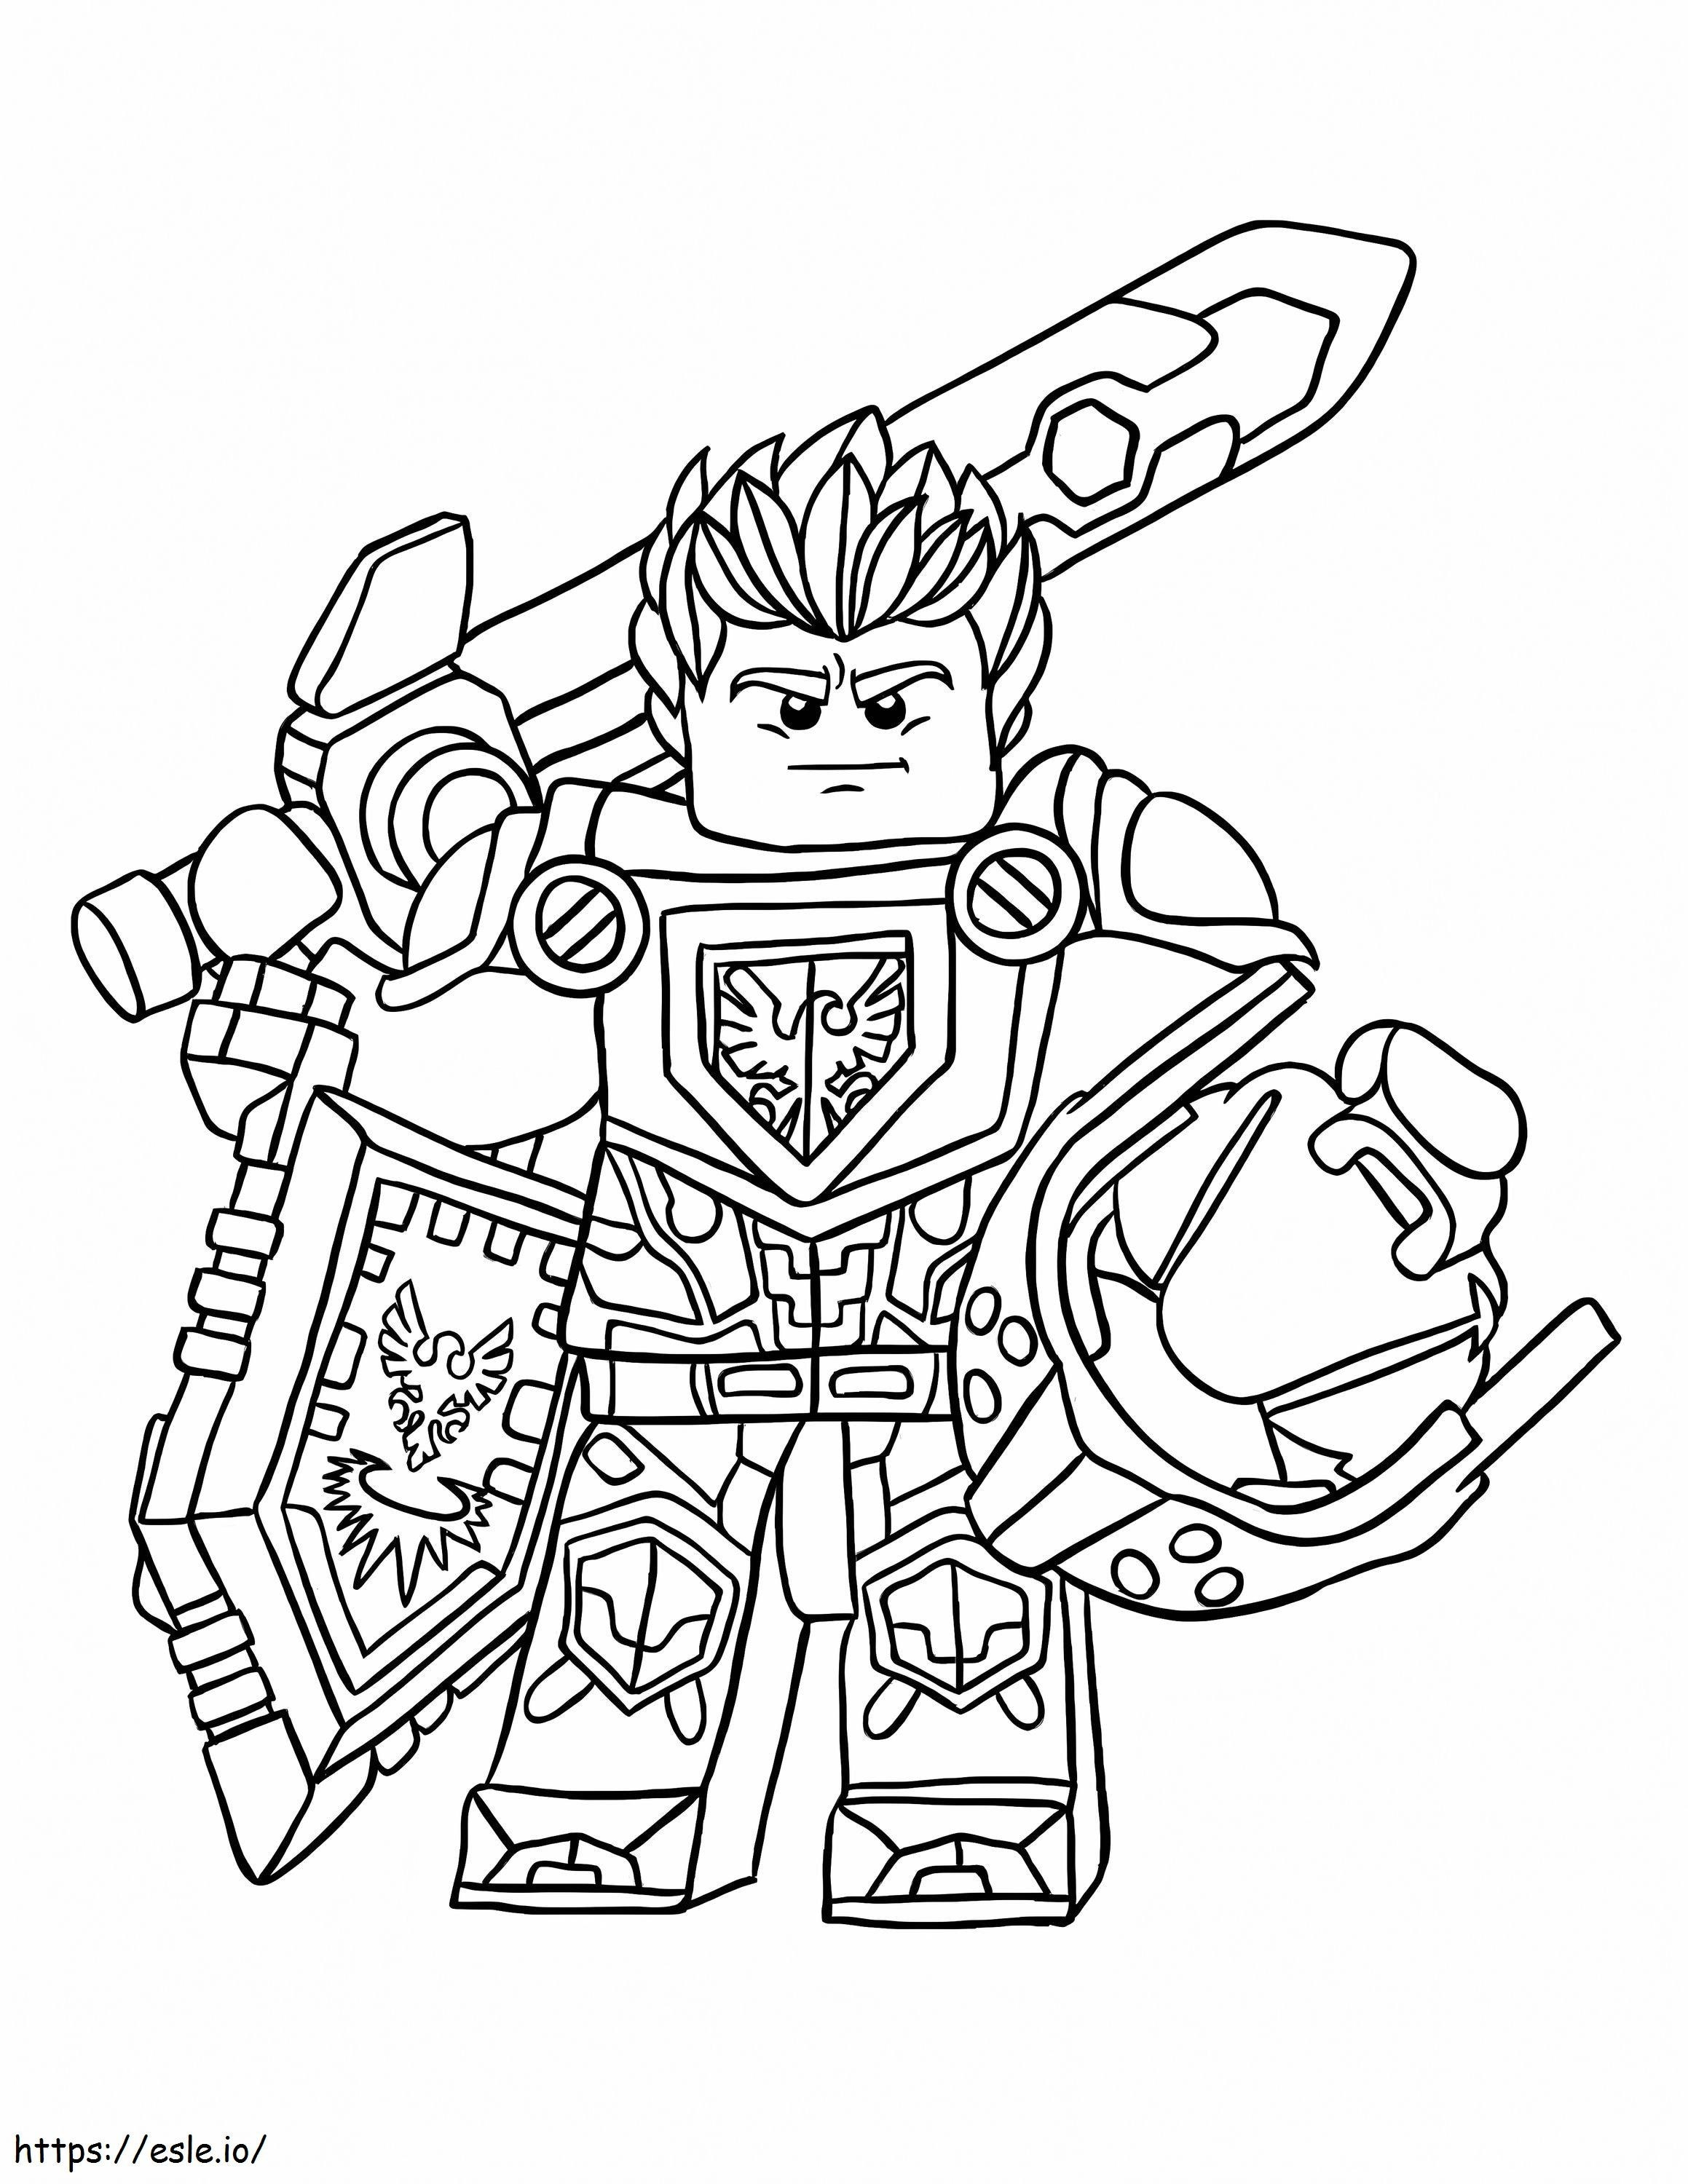 Cool Lego Knight coloring page